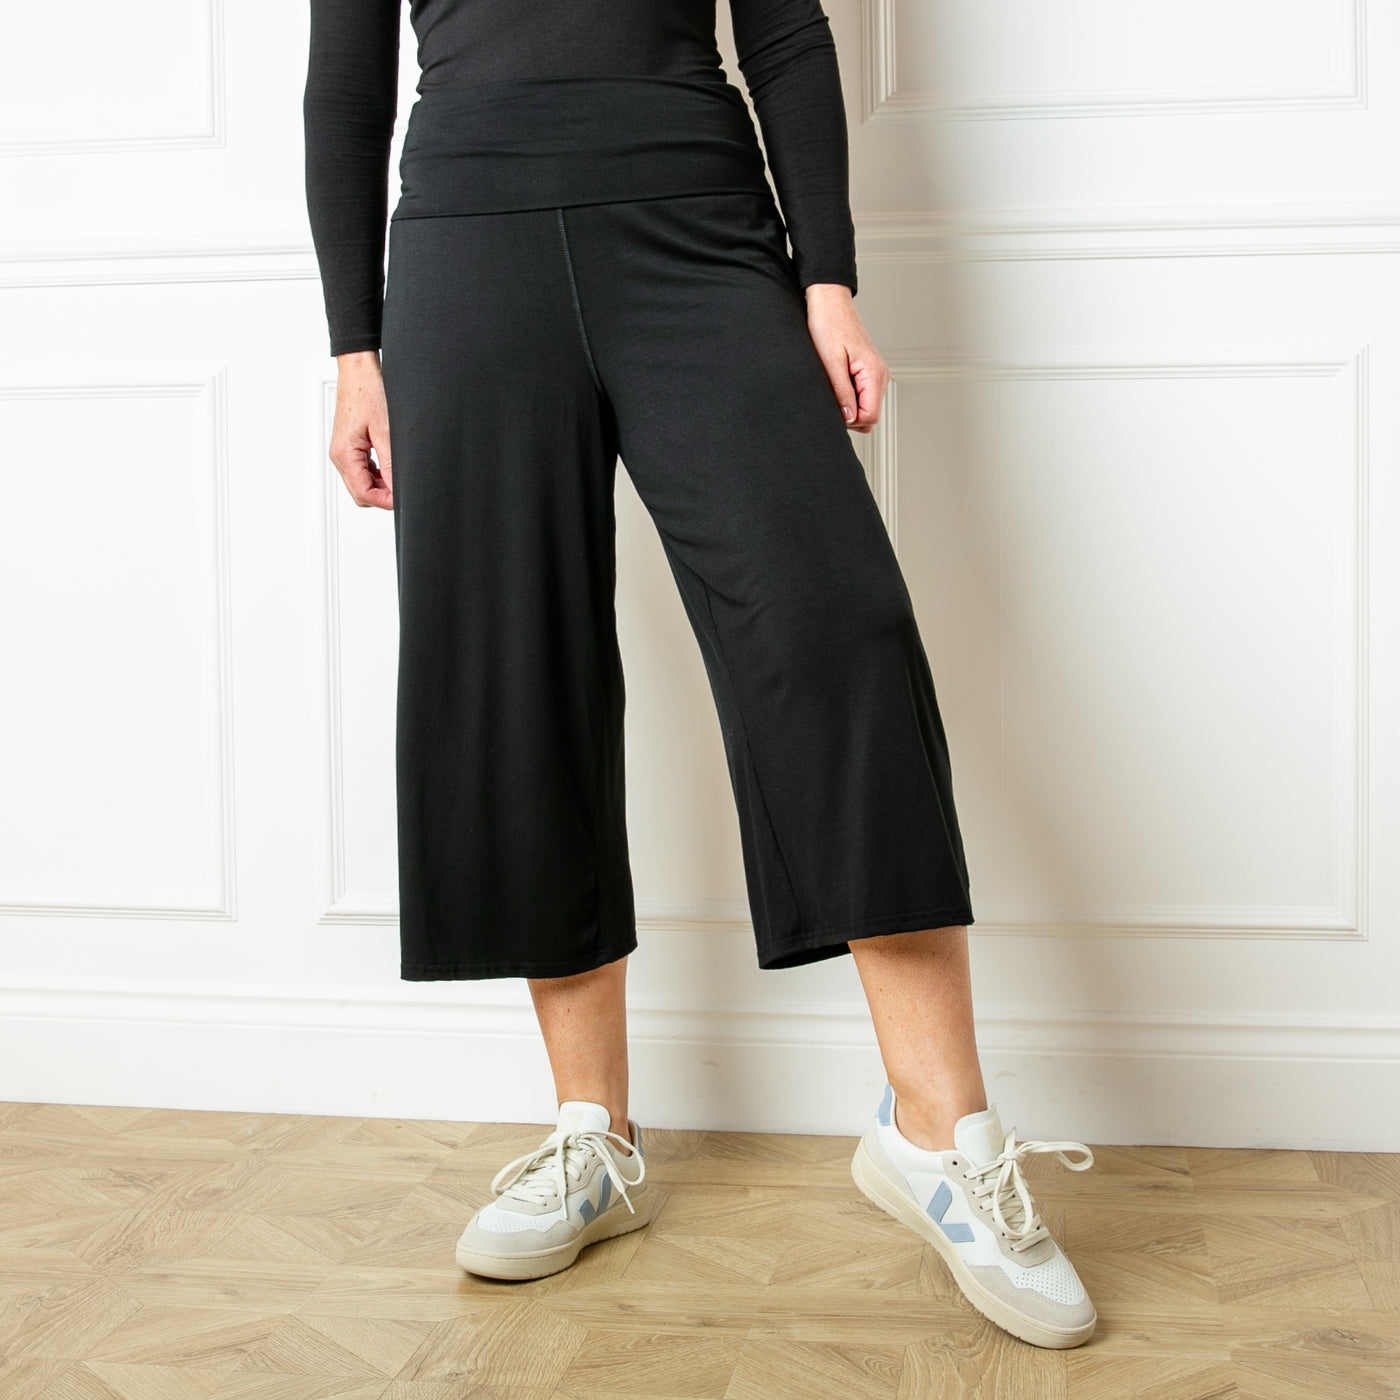 The black Bamboo Fold Over Pants with a wide leg silhouette in a soft and stretchy material